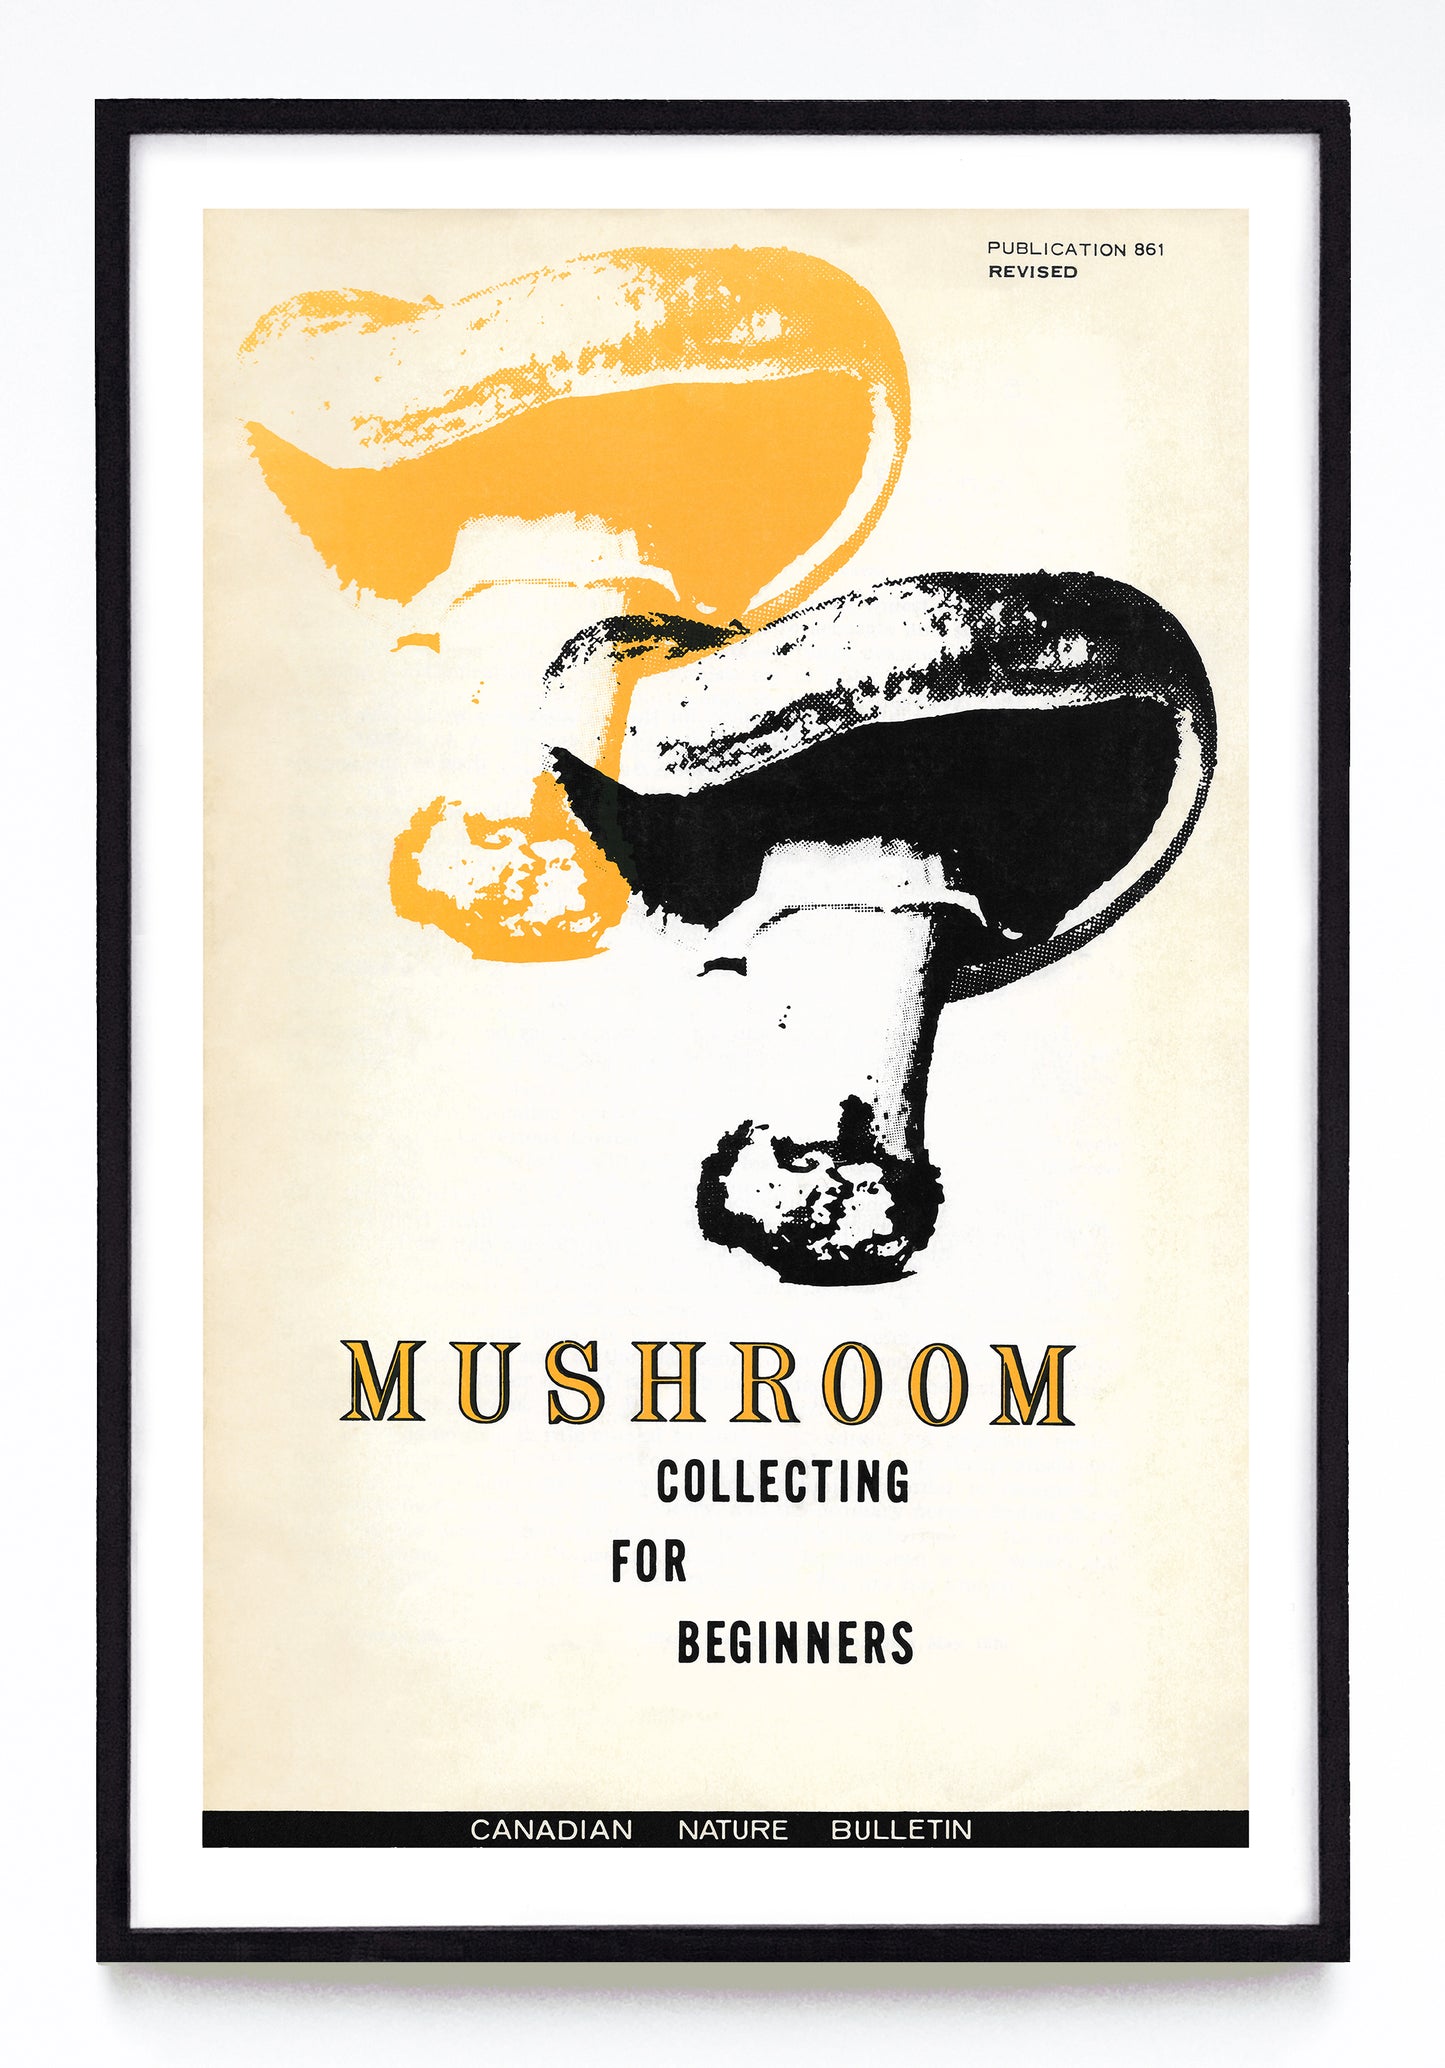 "Mushroom Collecting for Beginners" print (1971)